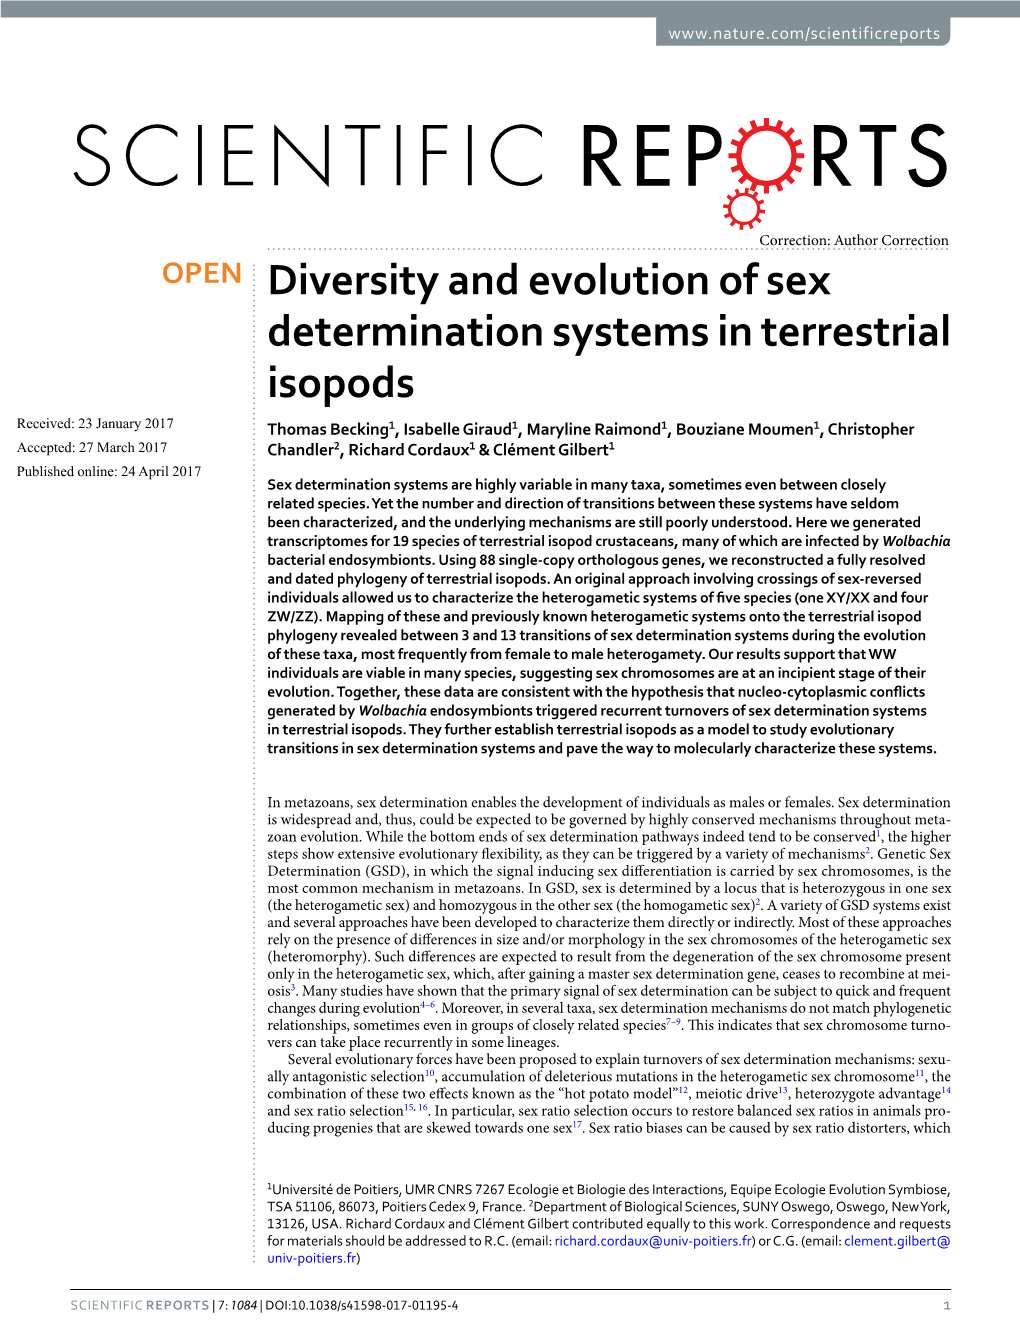 Diversity and Evolution of Sex Determination Systems in Terrestrial